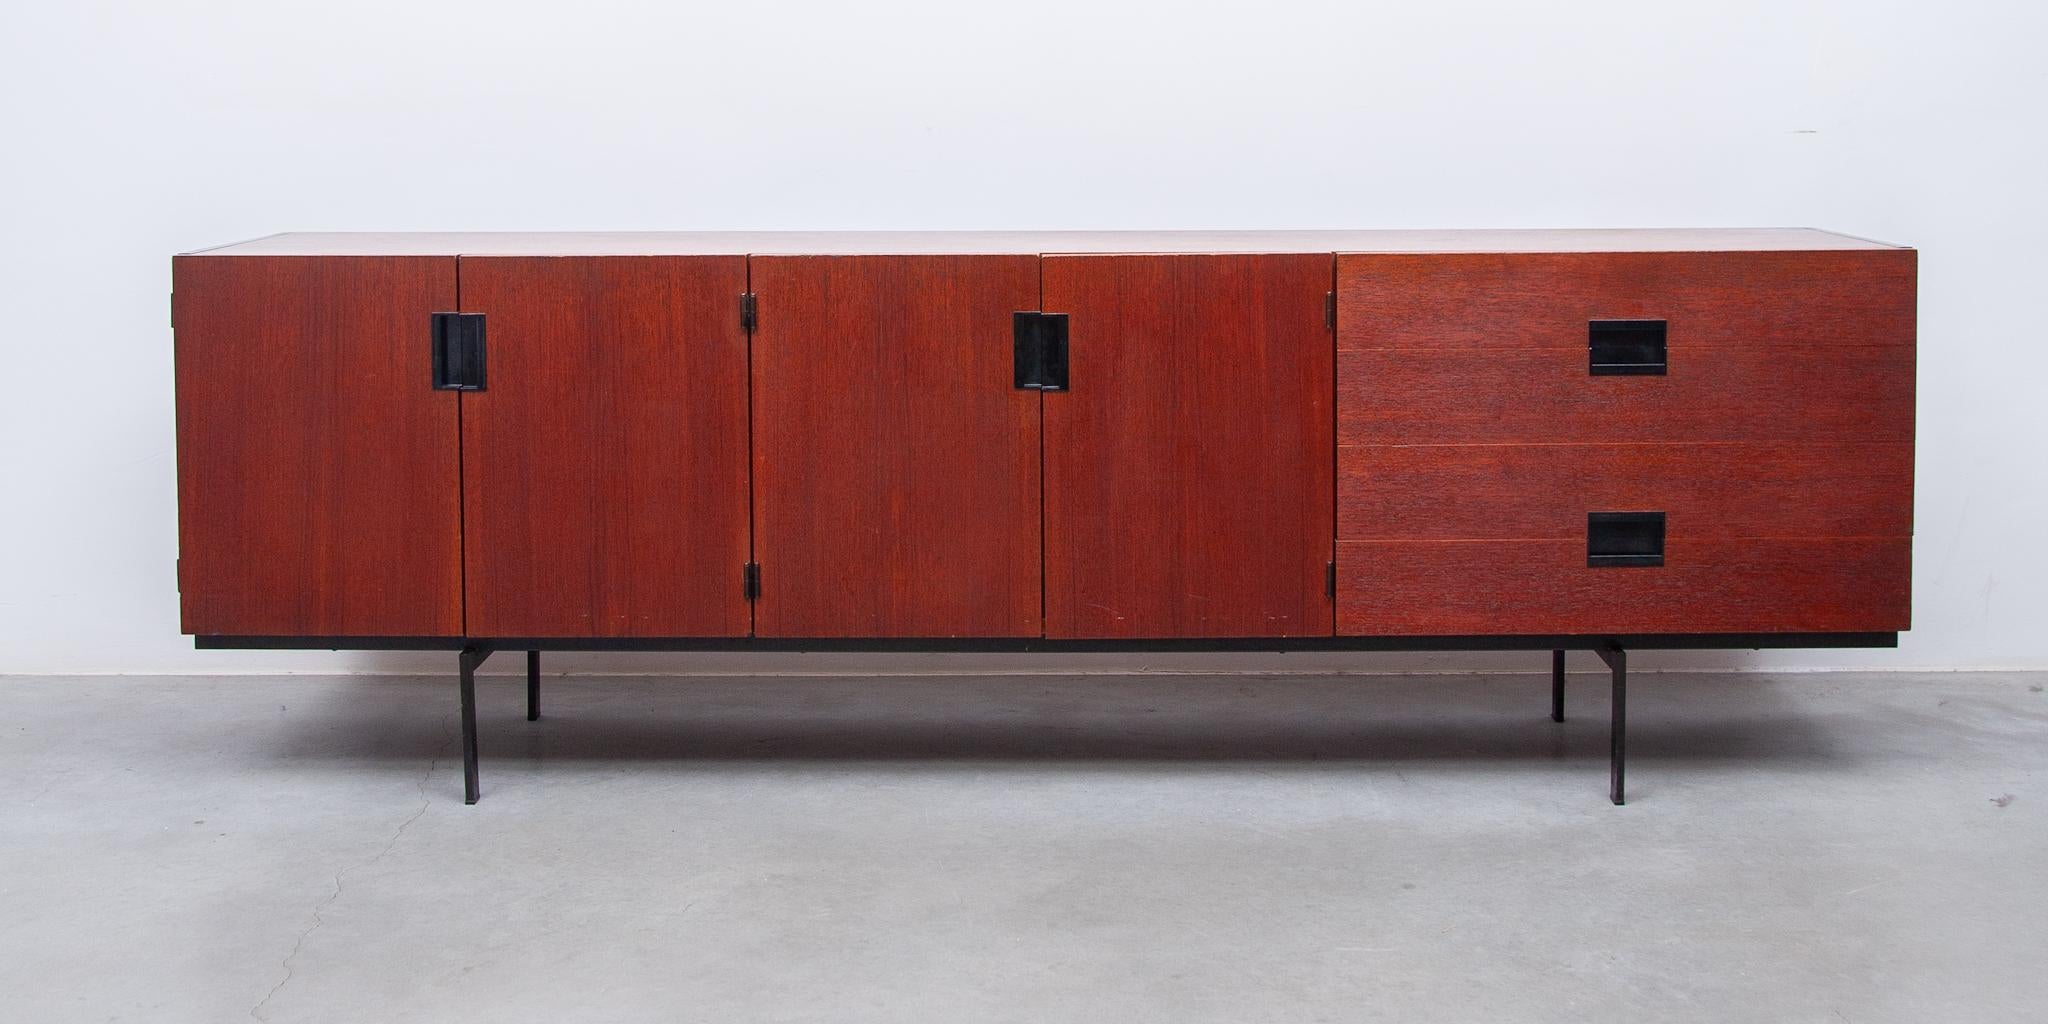 Minimalistisch Japanese series DU03 sideboard by Cees Braakman for Pastoe, 1958. Dutch design icon of high quality. The DU03 is one of the most famous but also most coveted sideboards from Pastoe. It's a part of the  